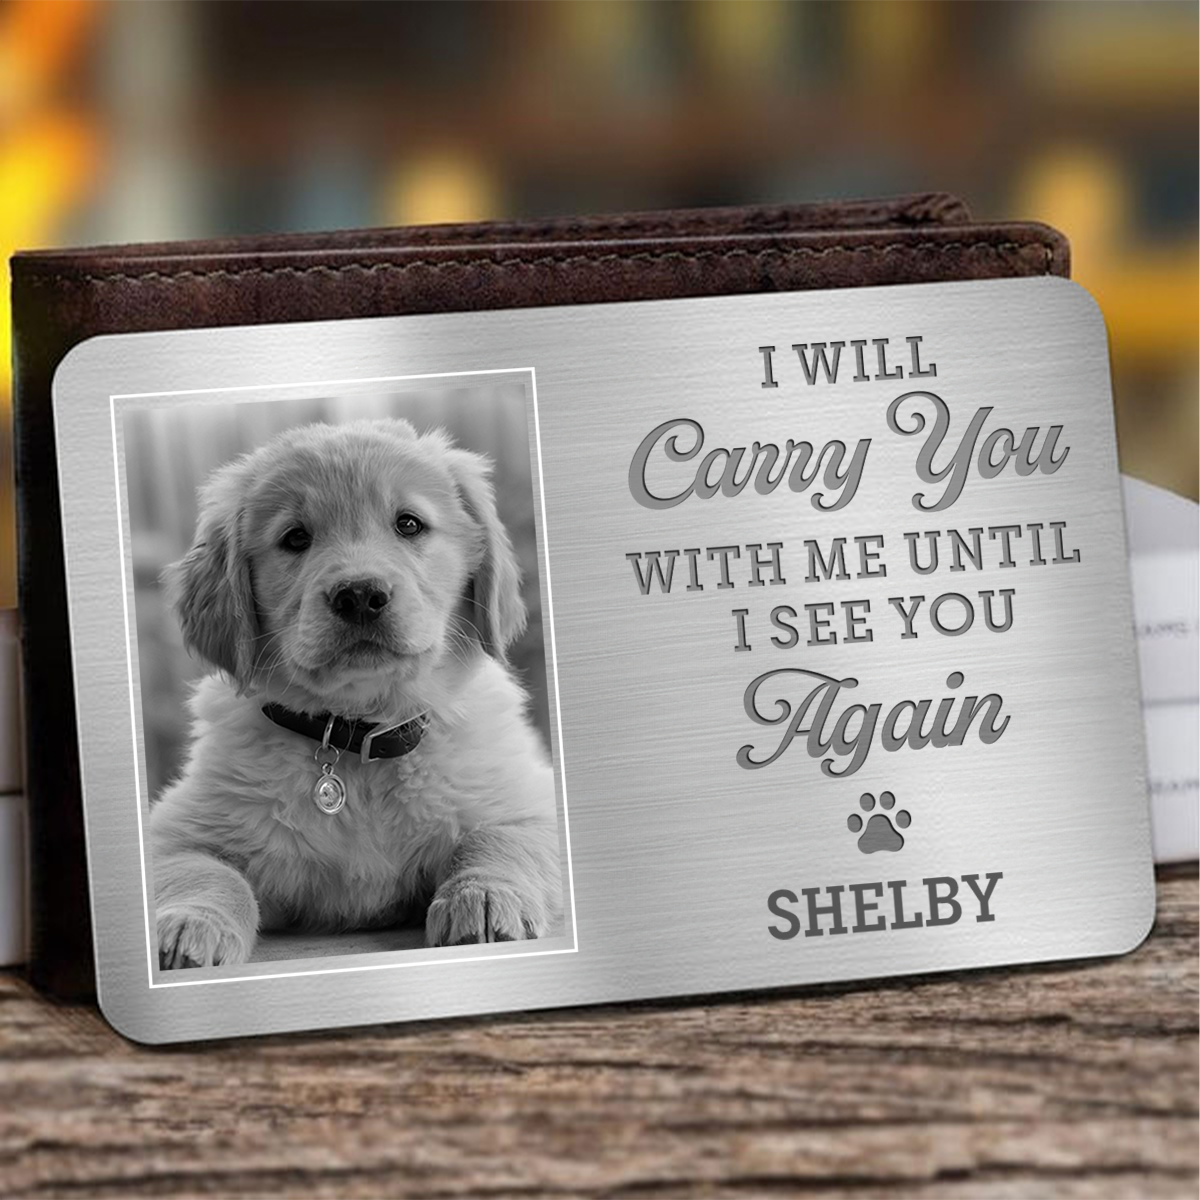 Discover I Will Carry You - Personalized Custom Wallet Card